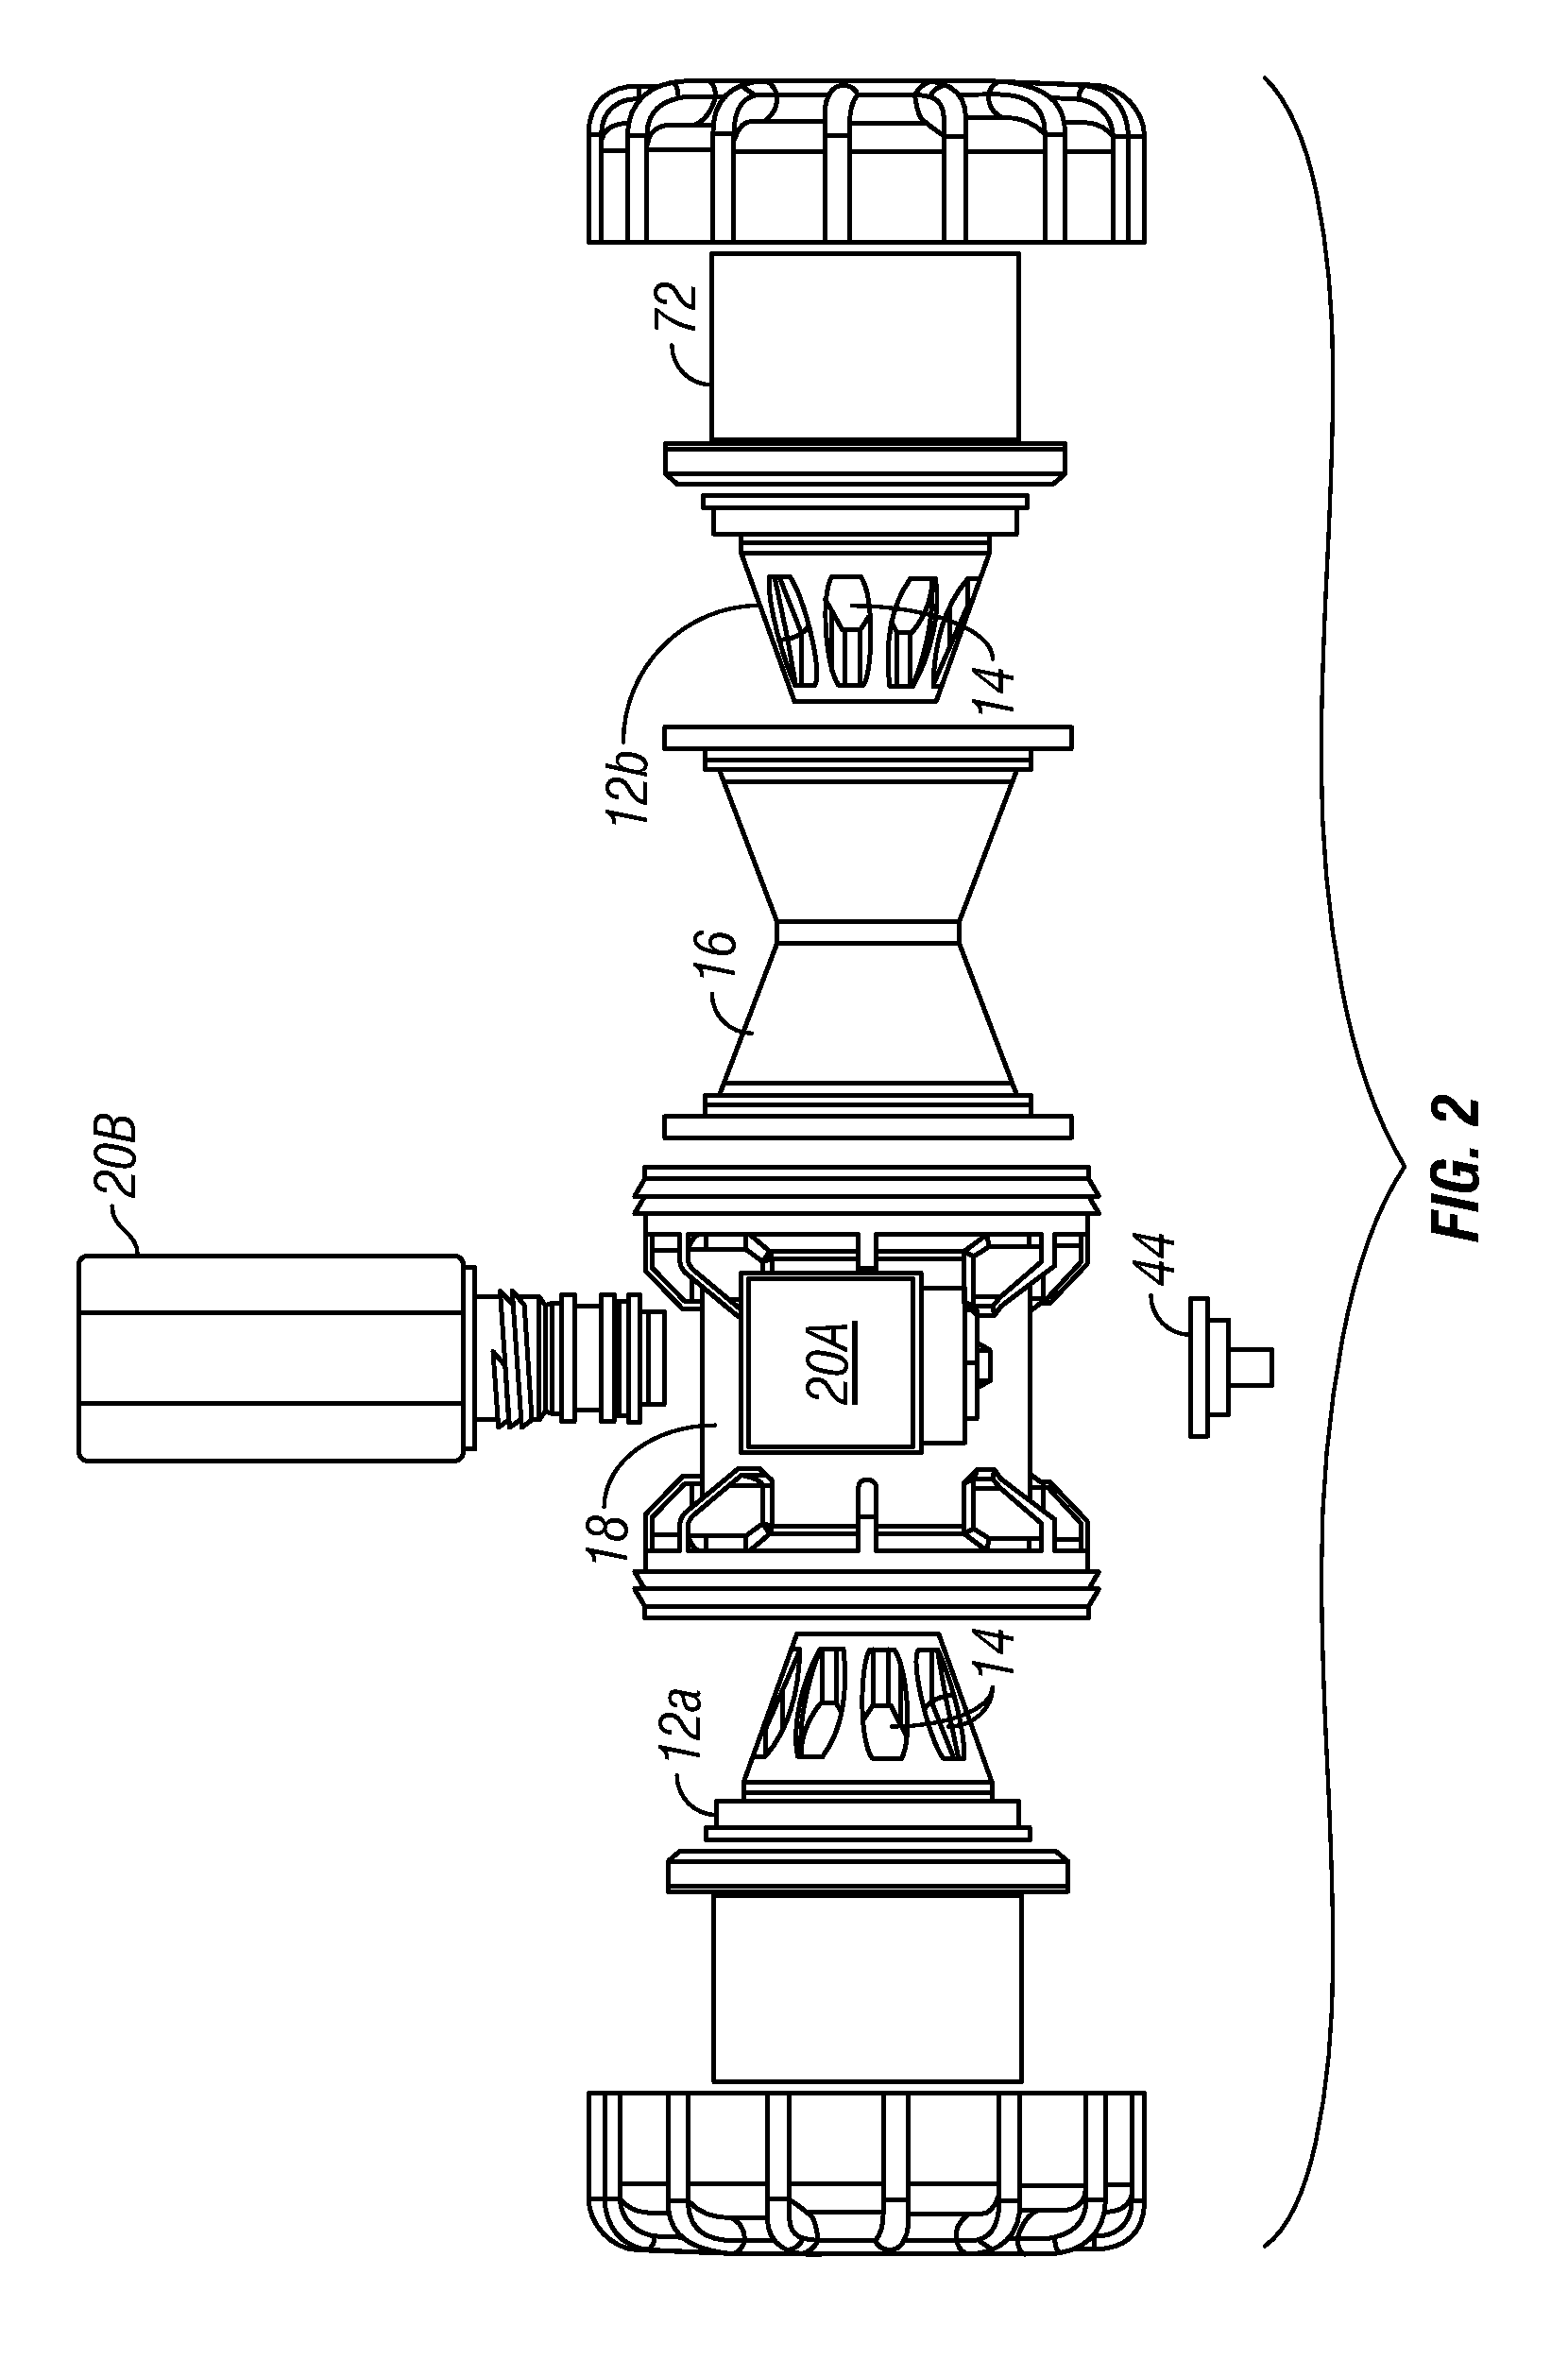 Sleeve valve for residential and commercial irrigation systems